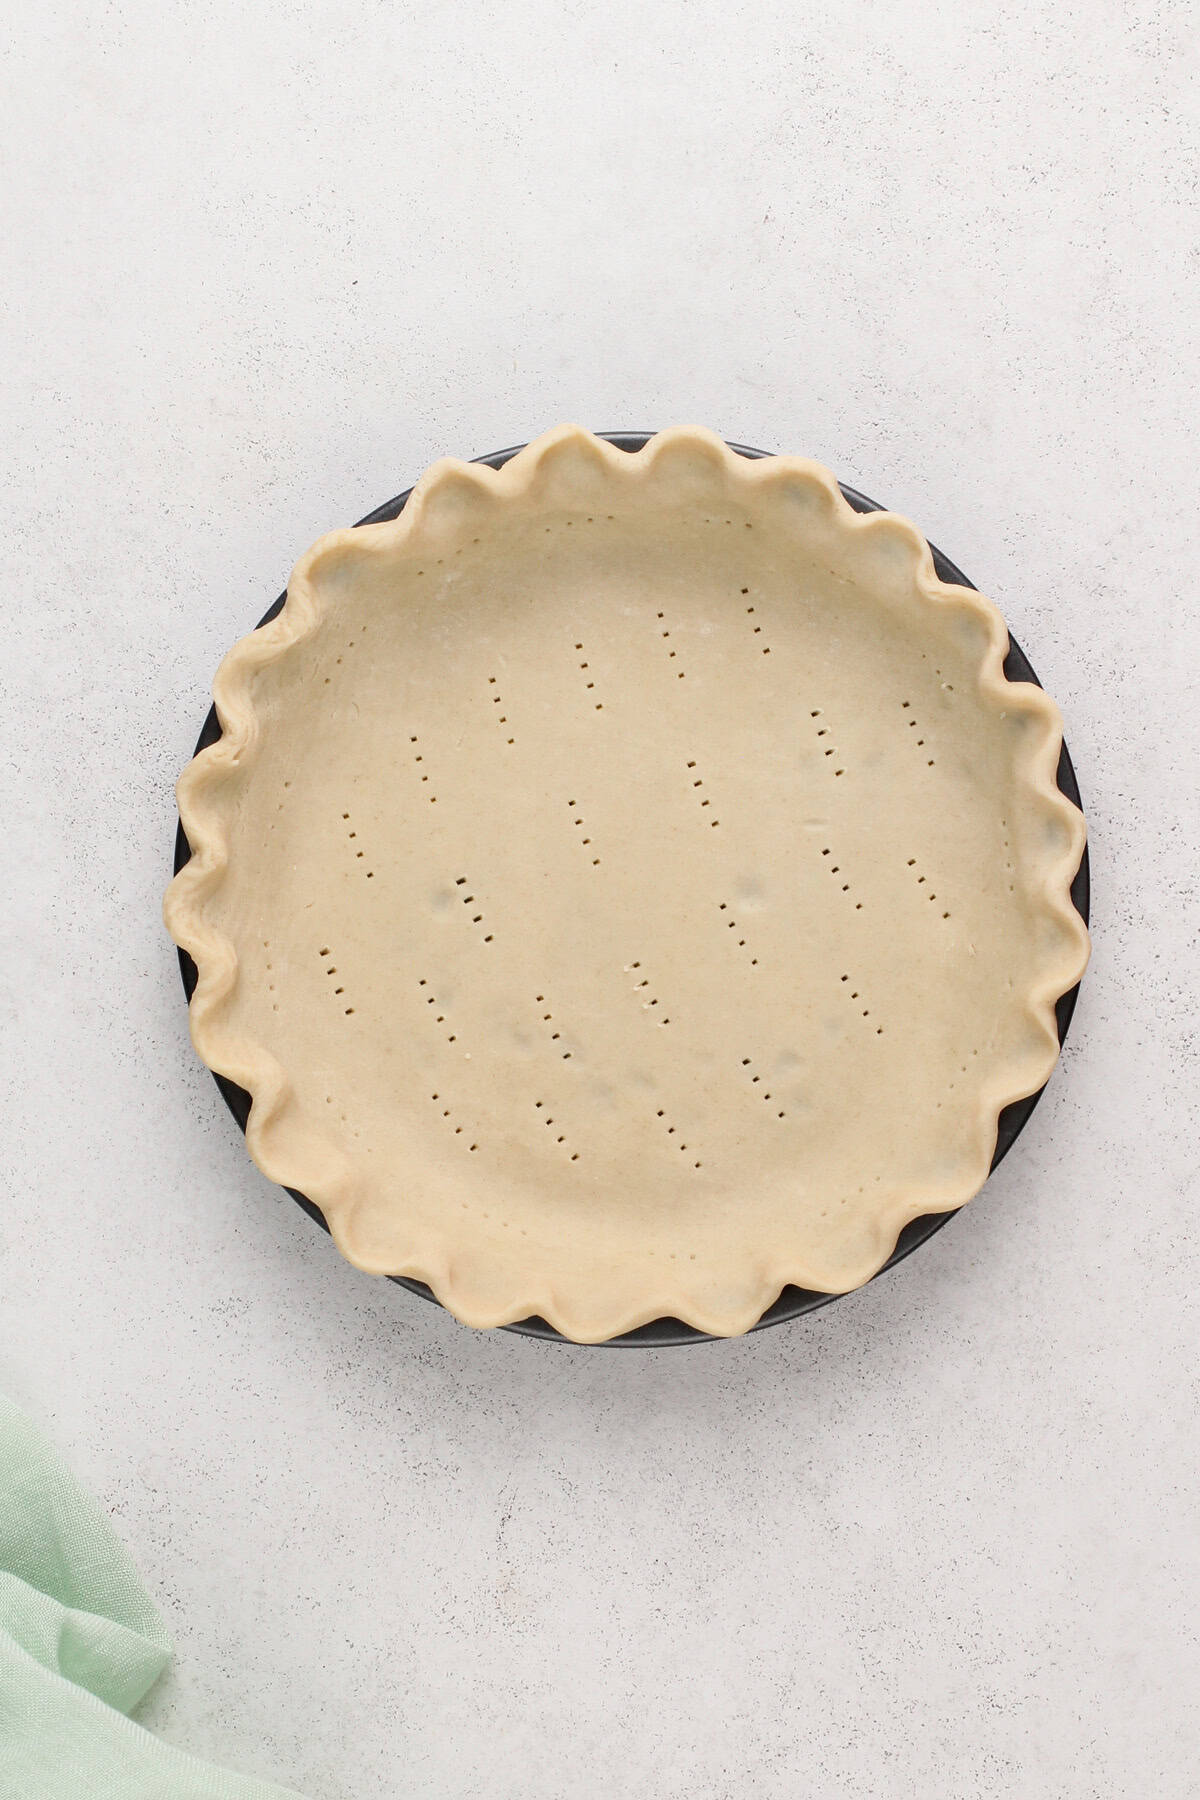 Pie crust crimped in a pie plate and poked with a fork for blind baking.